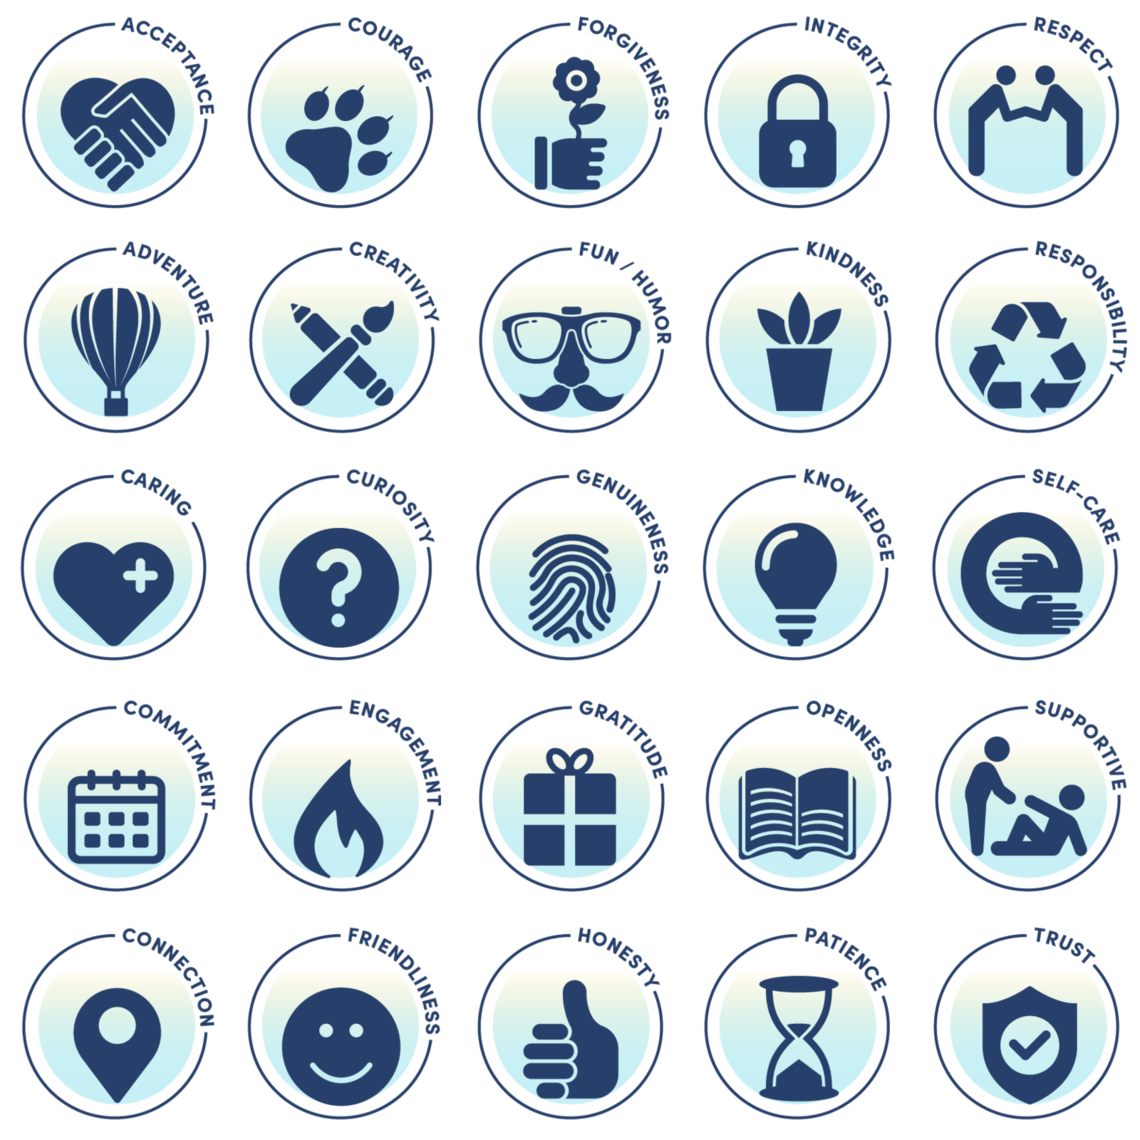 values icons